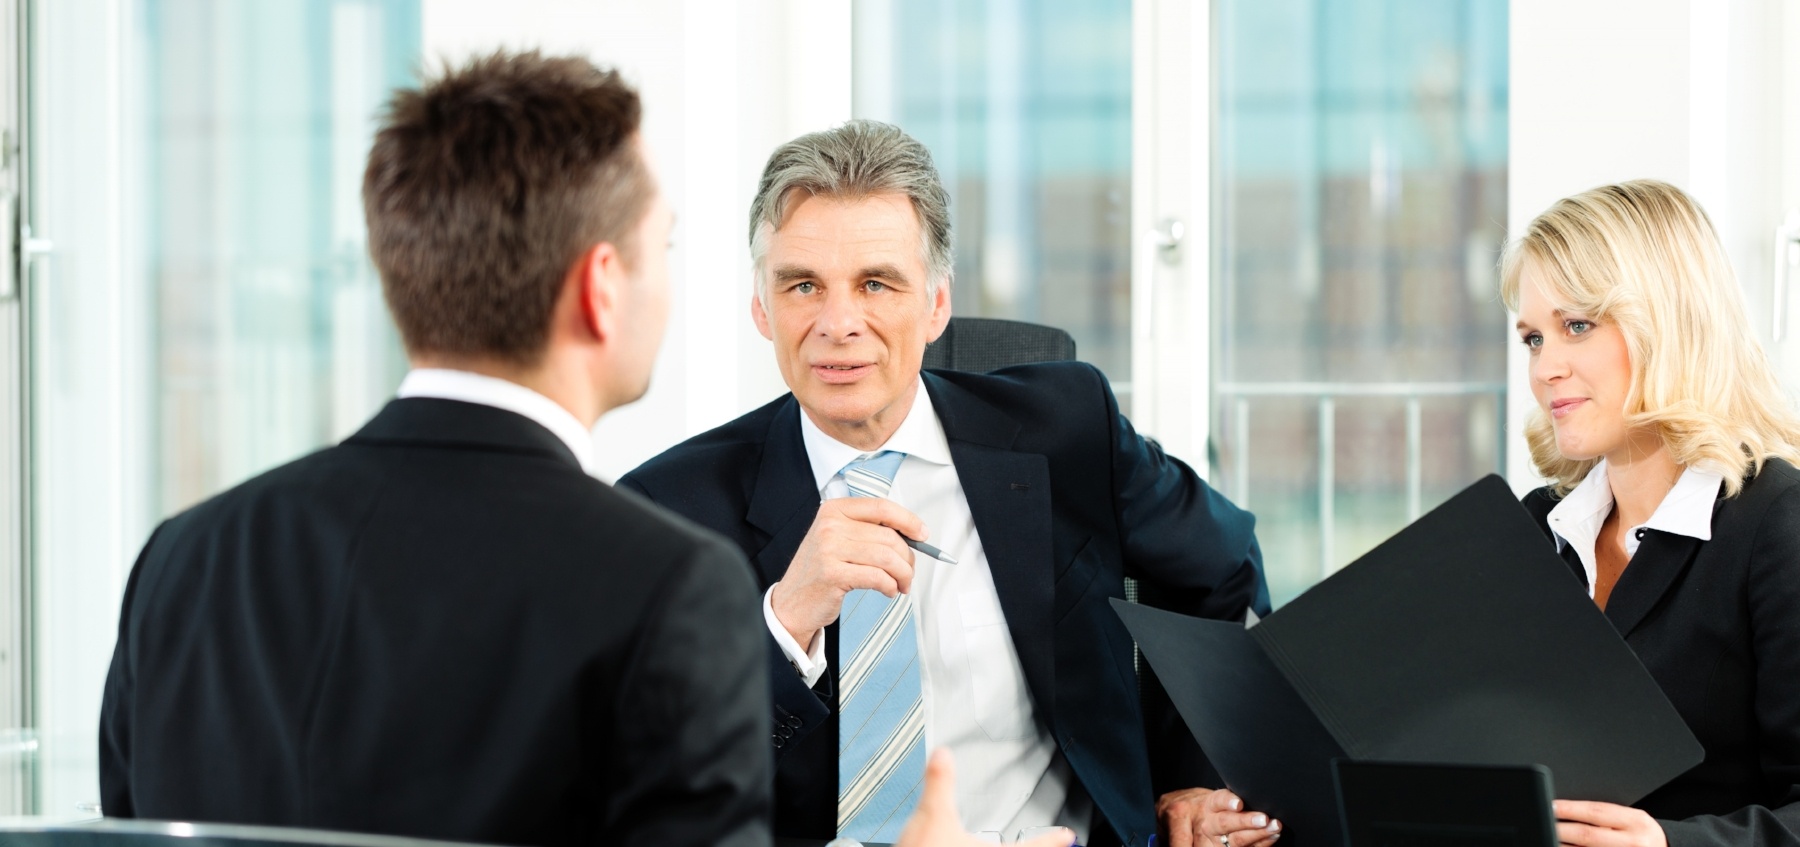 How Long Should an Interview Last?